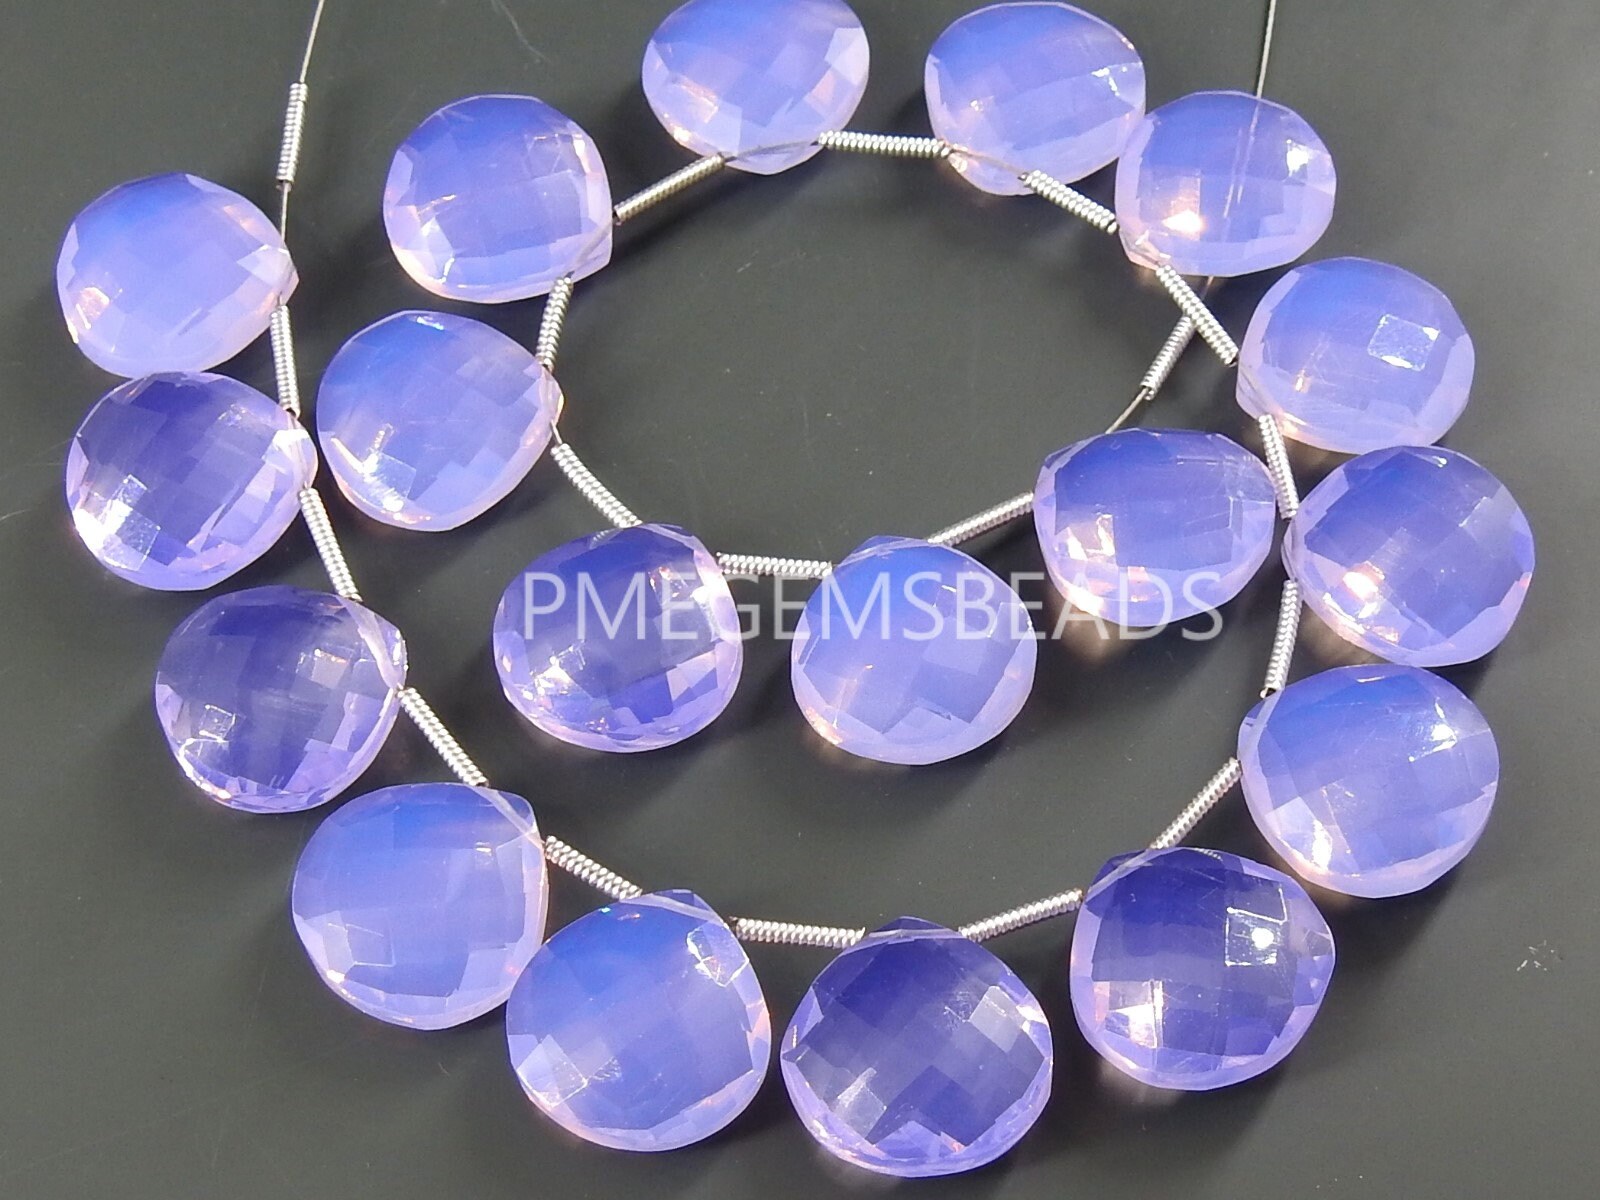 Lavender Blue Quartz Hearts,Teardrop,Drop,Micro Faceted,Loose Stone,Earrings Pair,For Making Jewelry,Hydro,Glass 14X14MM Approx (pme) | Save 33% - Rajasthan Living 15